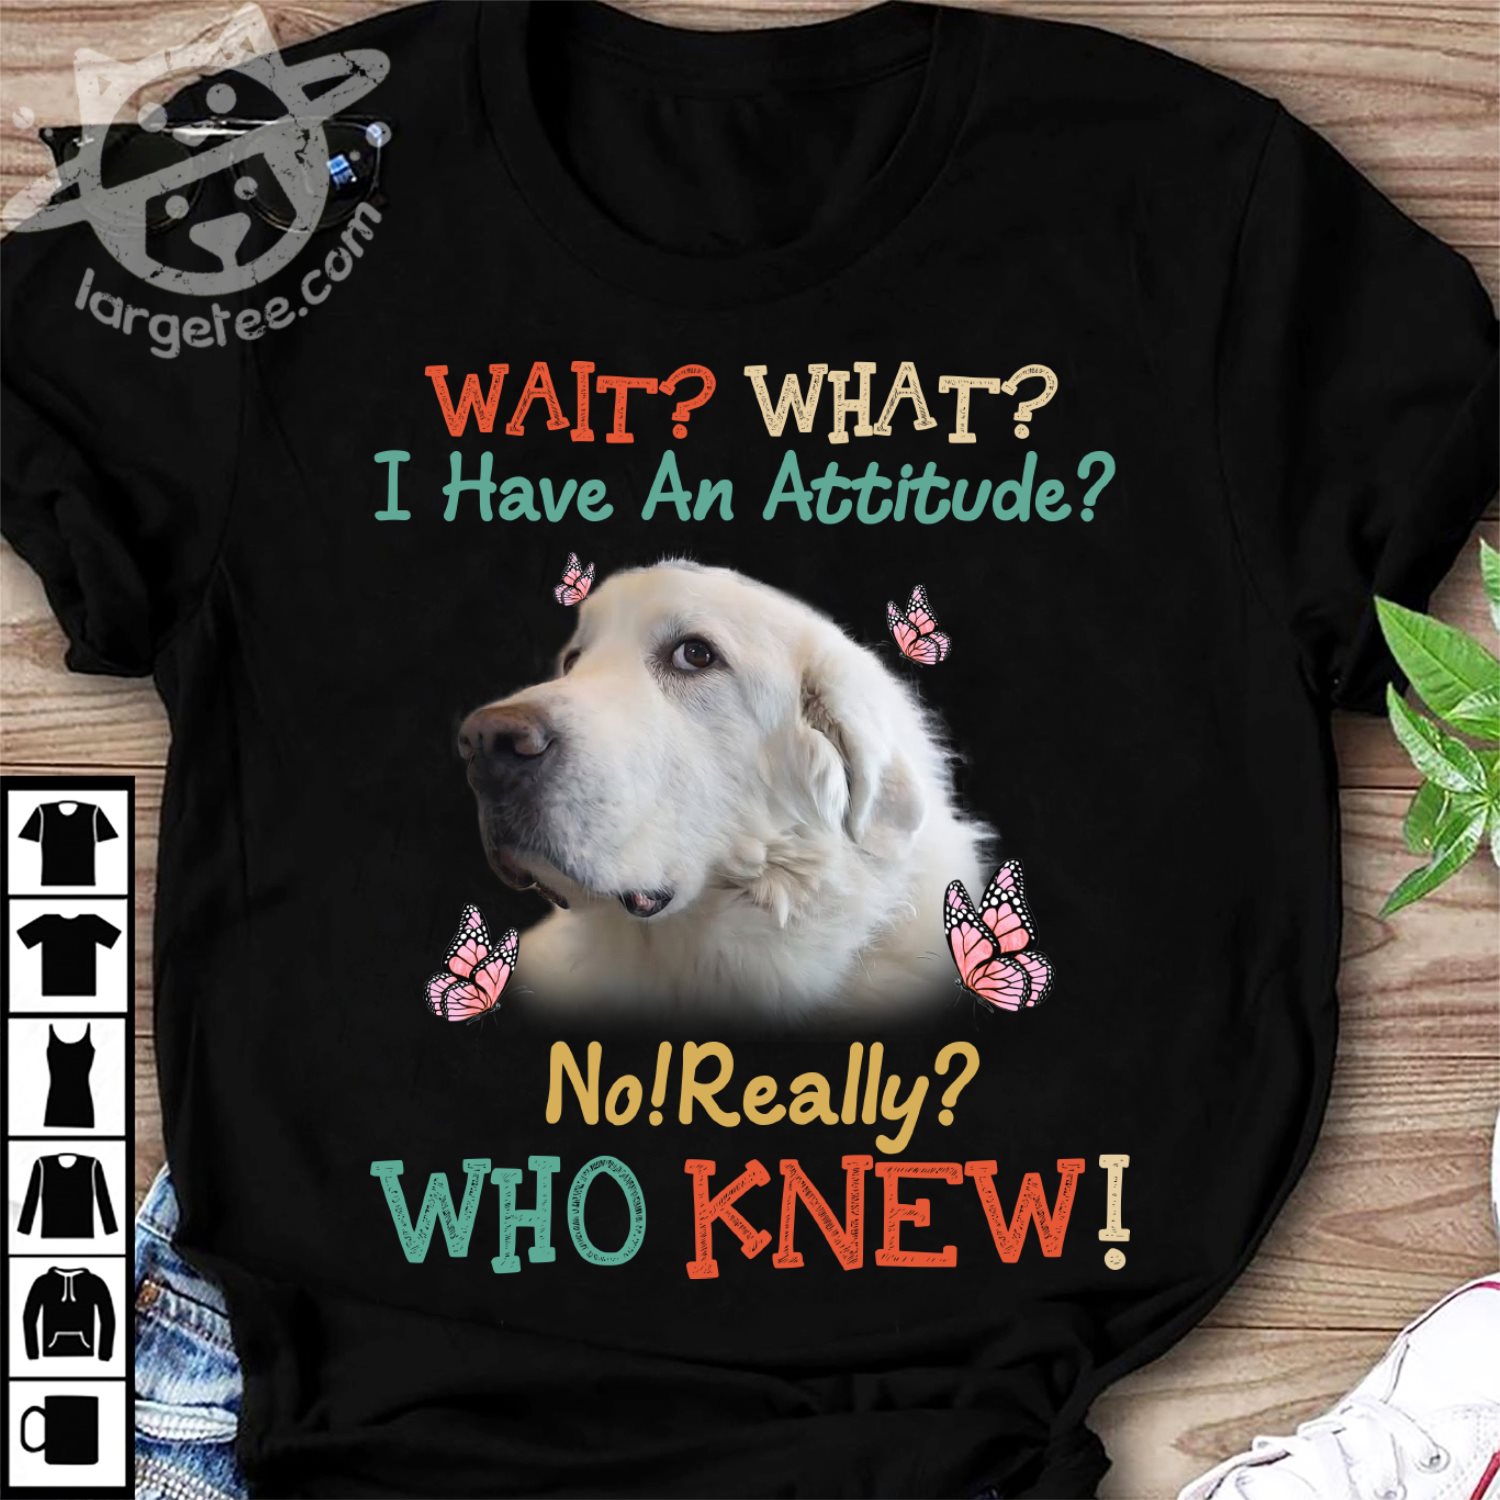 Golden Retriever Dog -Wait? what? i have an attitude? No! really who knew!